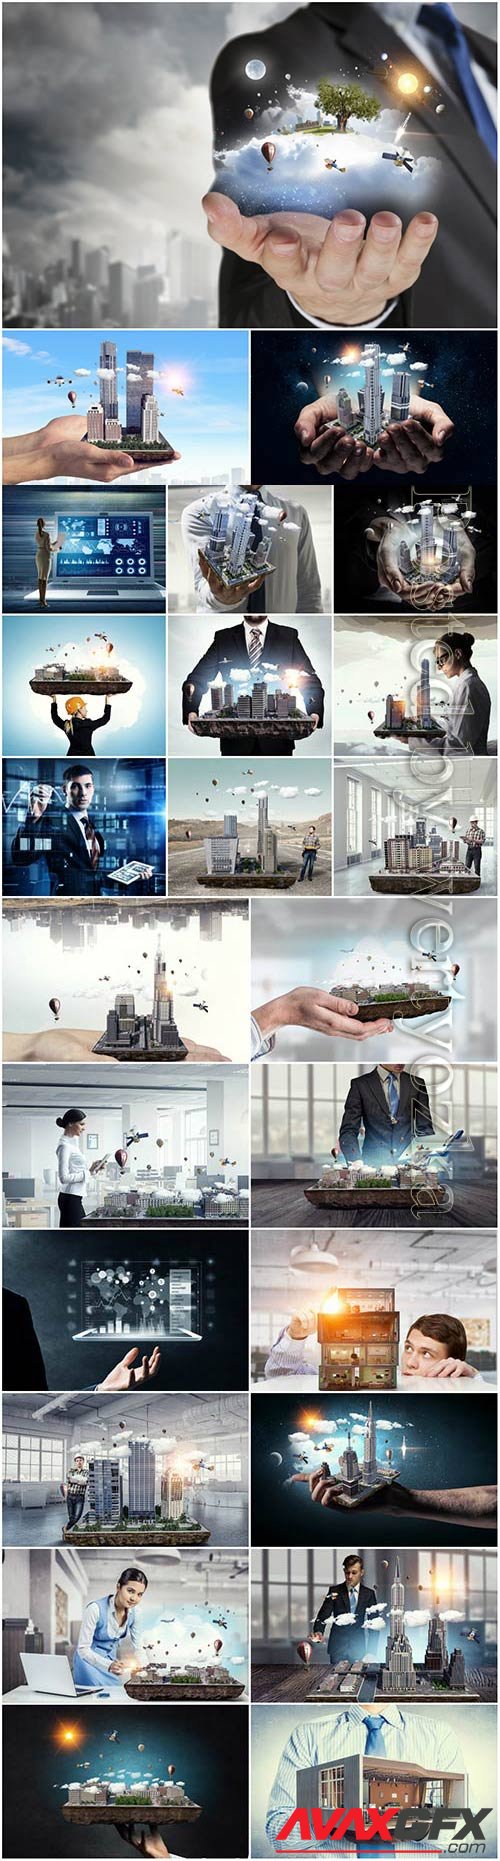 Business concept stock photo